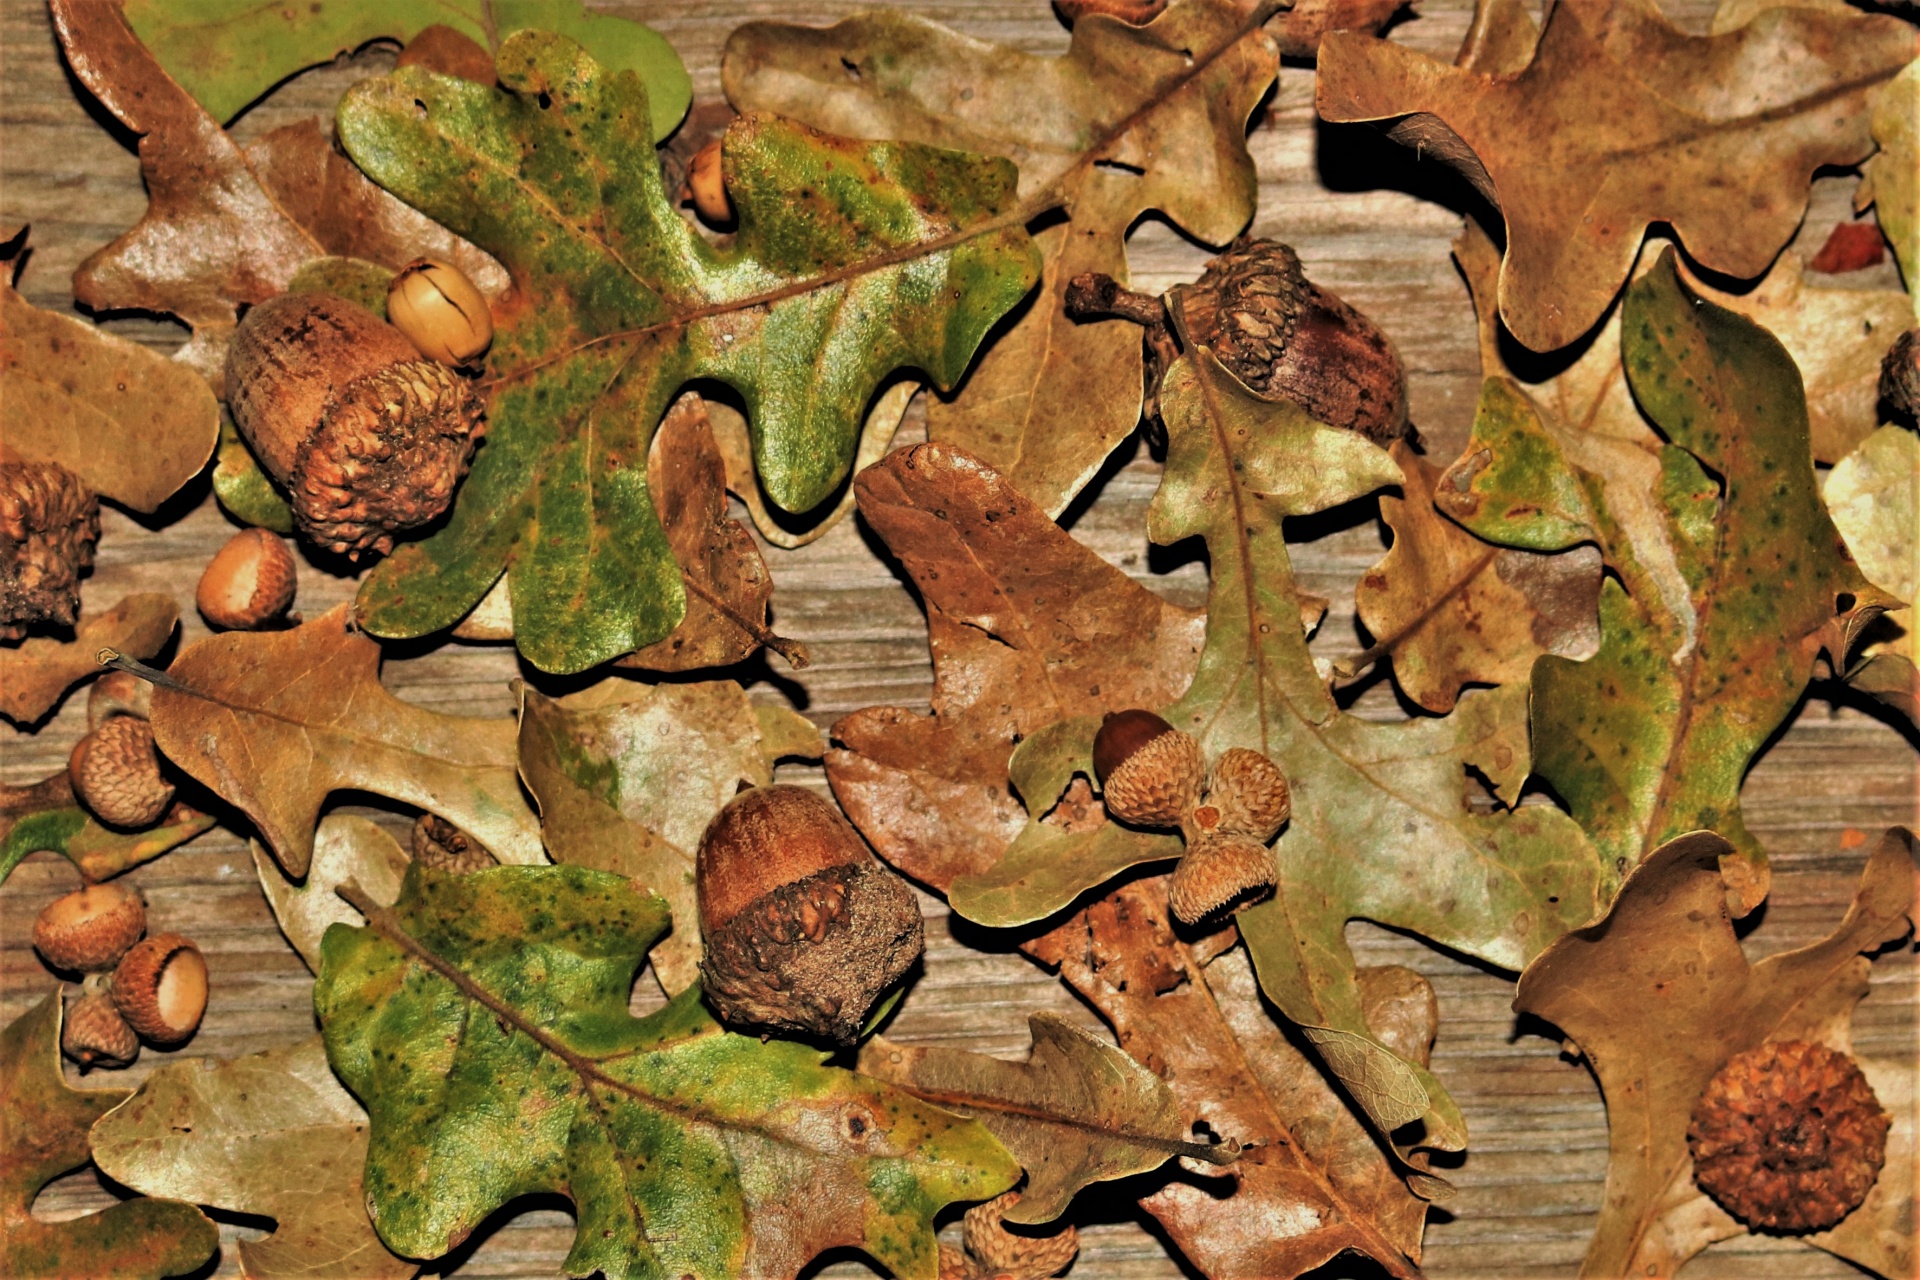 Close-up of acorns and oak leaves scattered on a wood background.